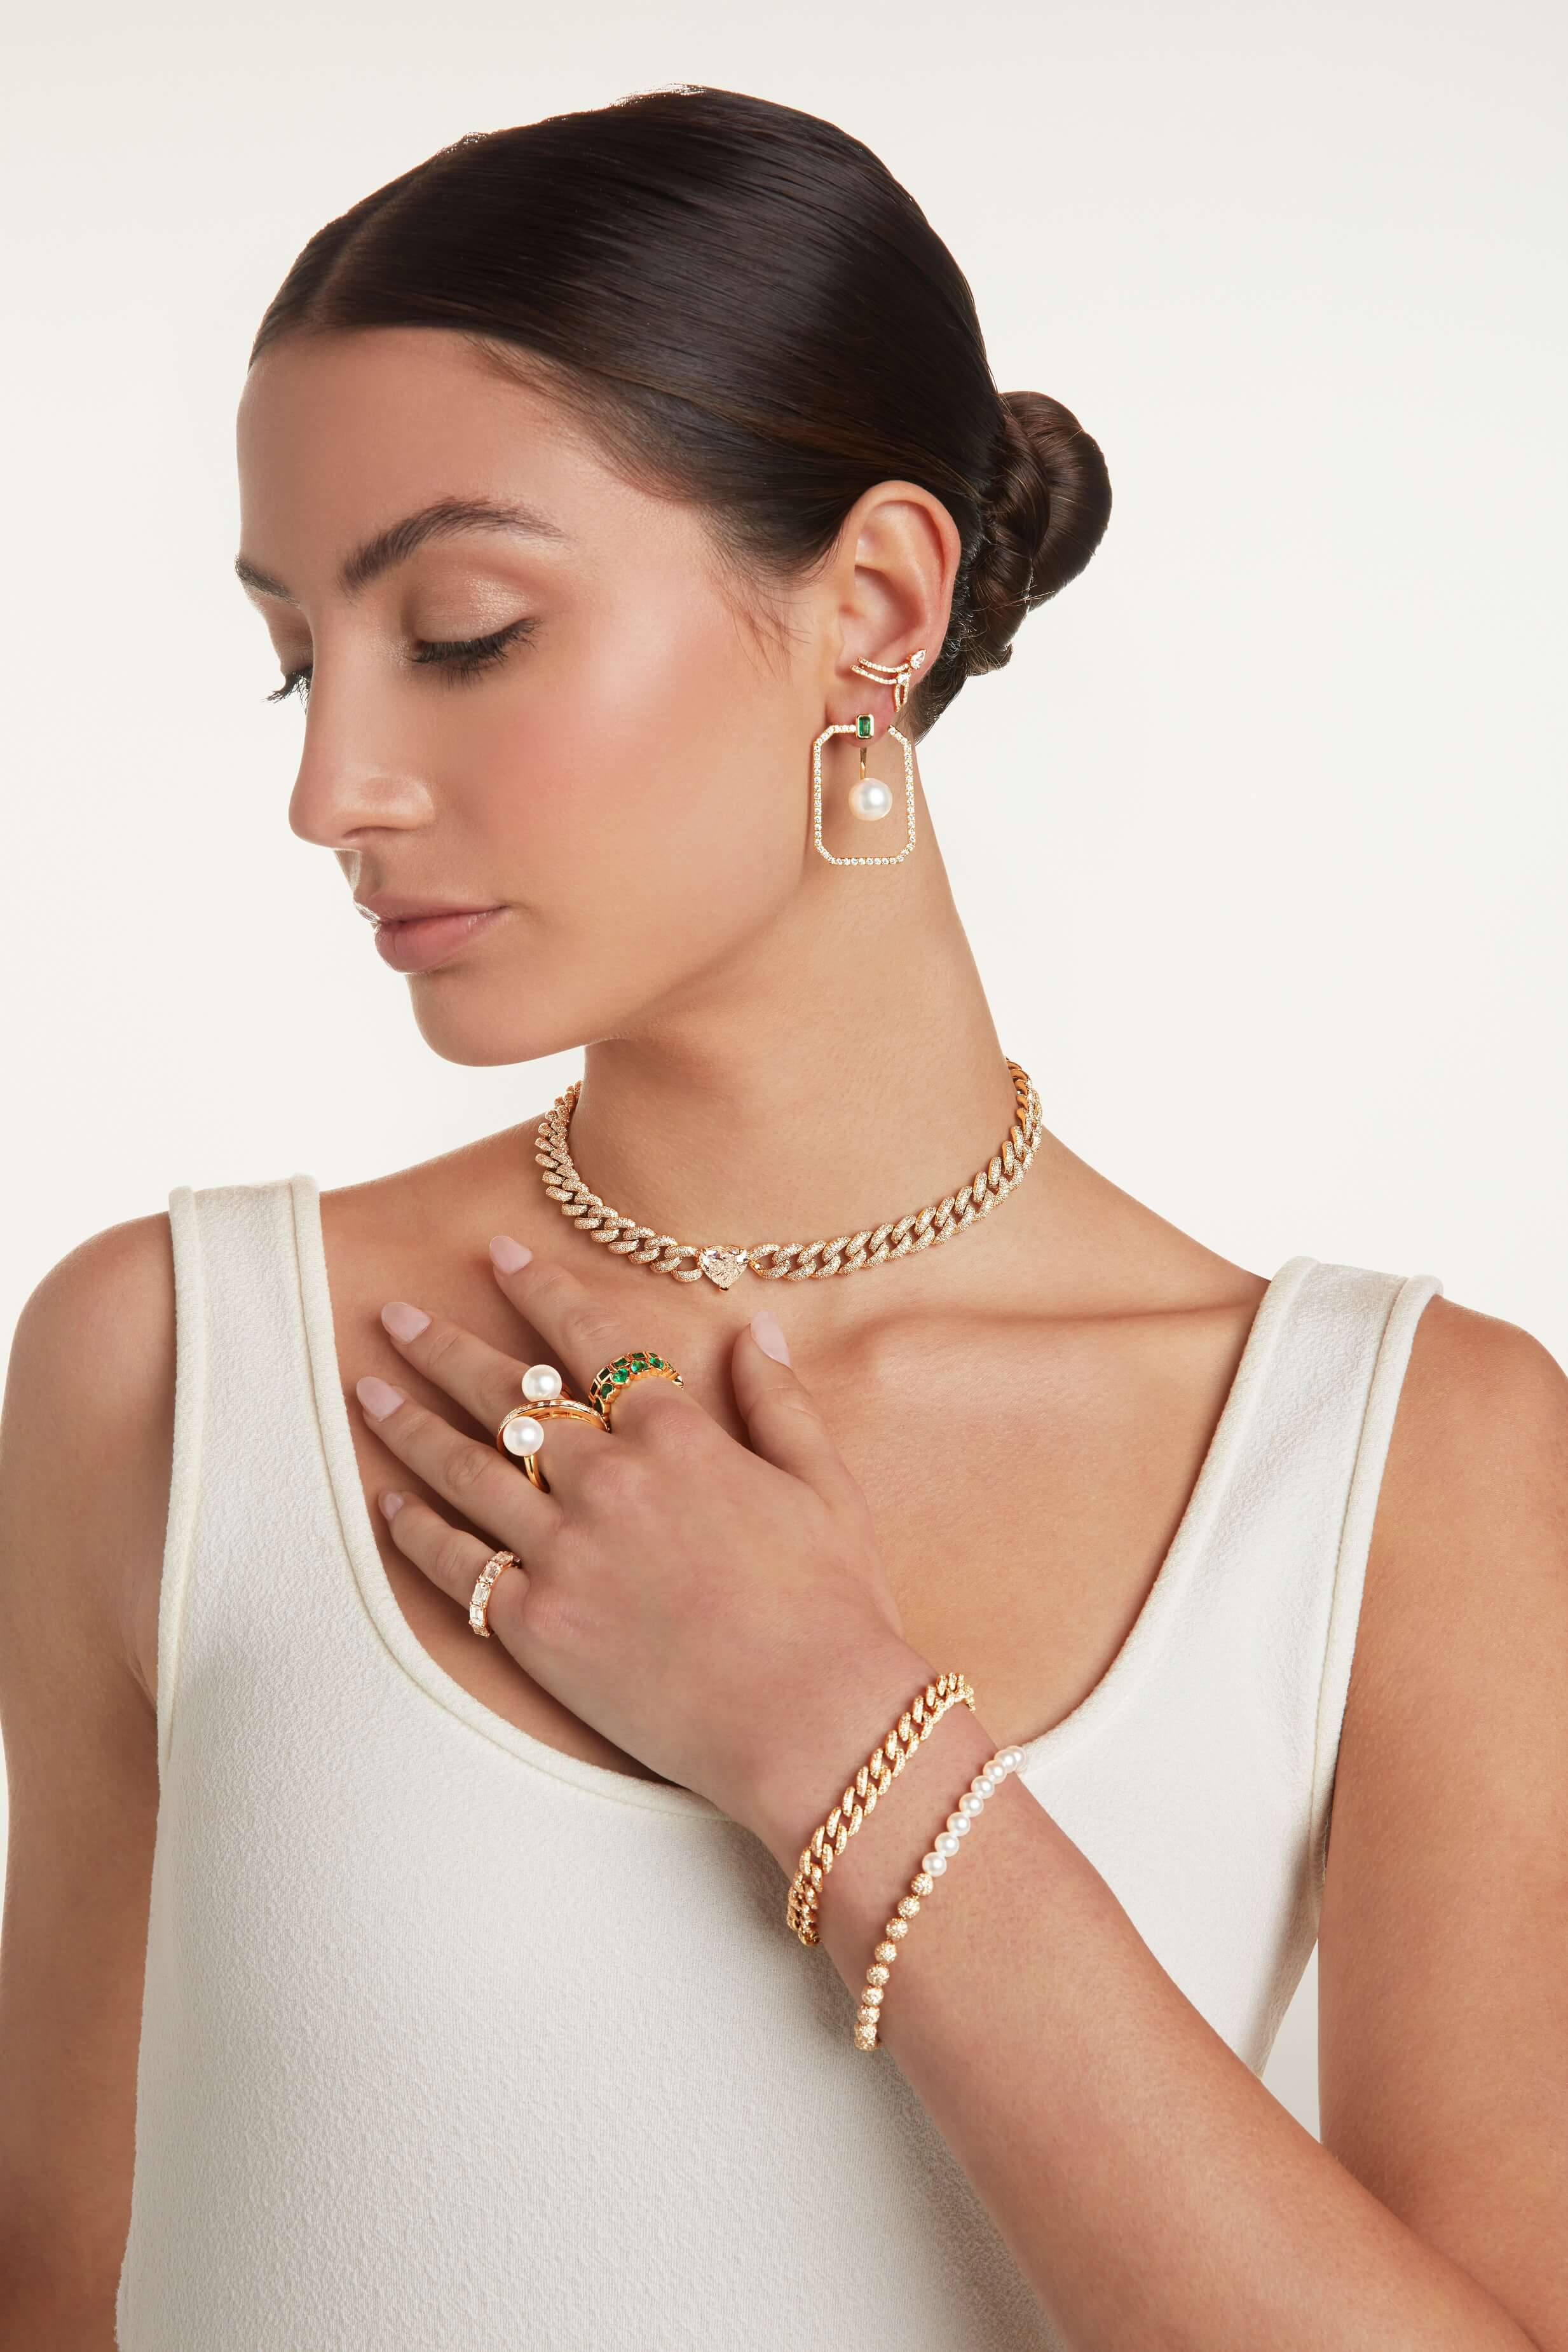 A female model touching her collar bone area showing her rings, bracelet and necklace